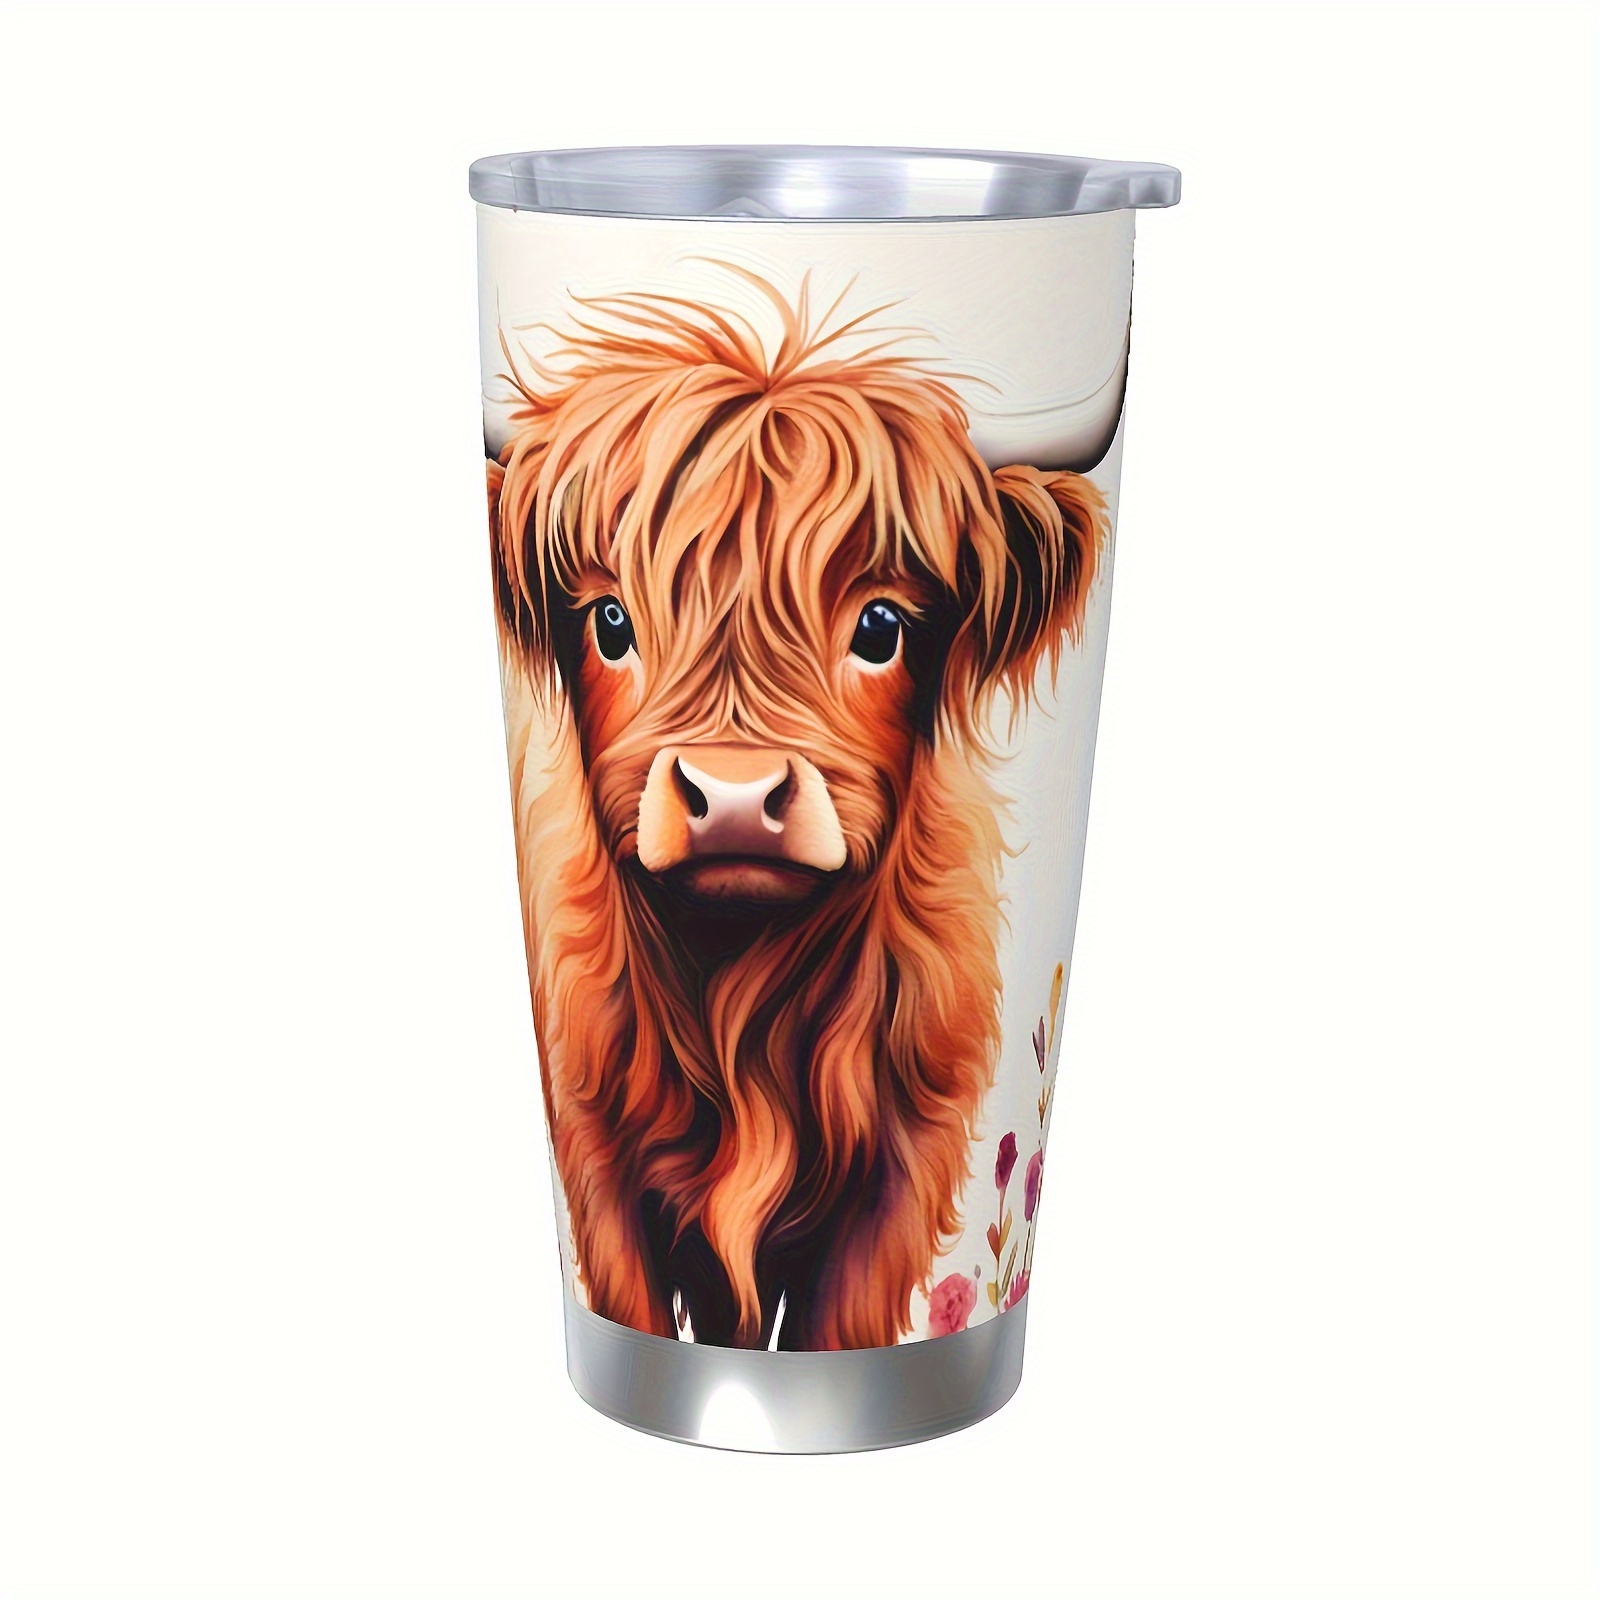 Highland Cow Farm 40 oz Tumbler with Lid and Straw, Brand New Handmade